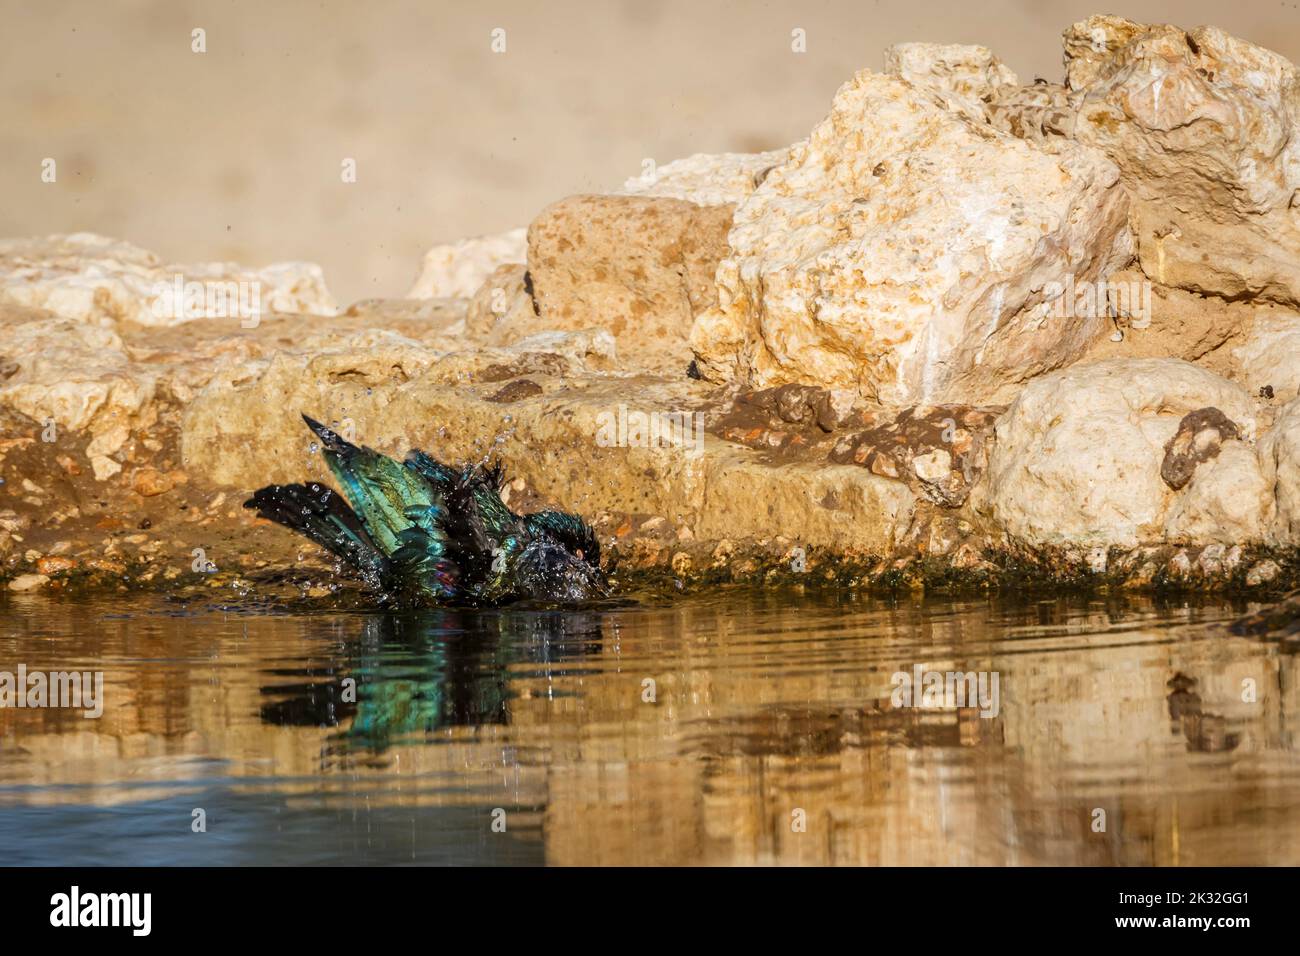 Cape Glossy Starling bathing in waterhole in Kgalagadi transfrontier park, South Africa; Specie Lamprotornis nitens family of Sturnidae Stock Photo